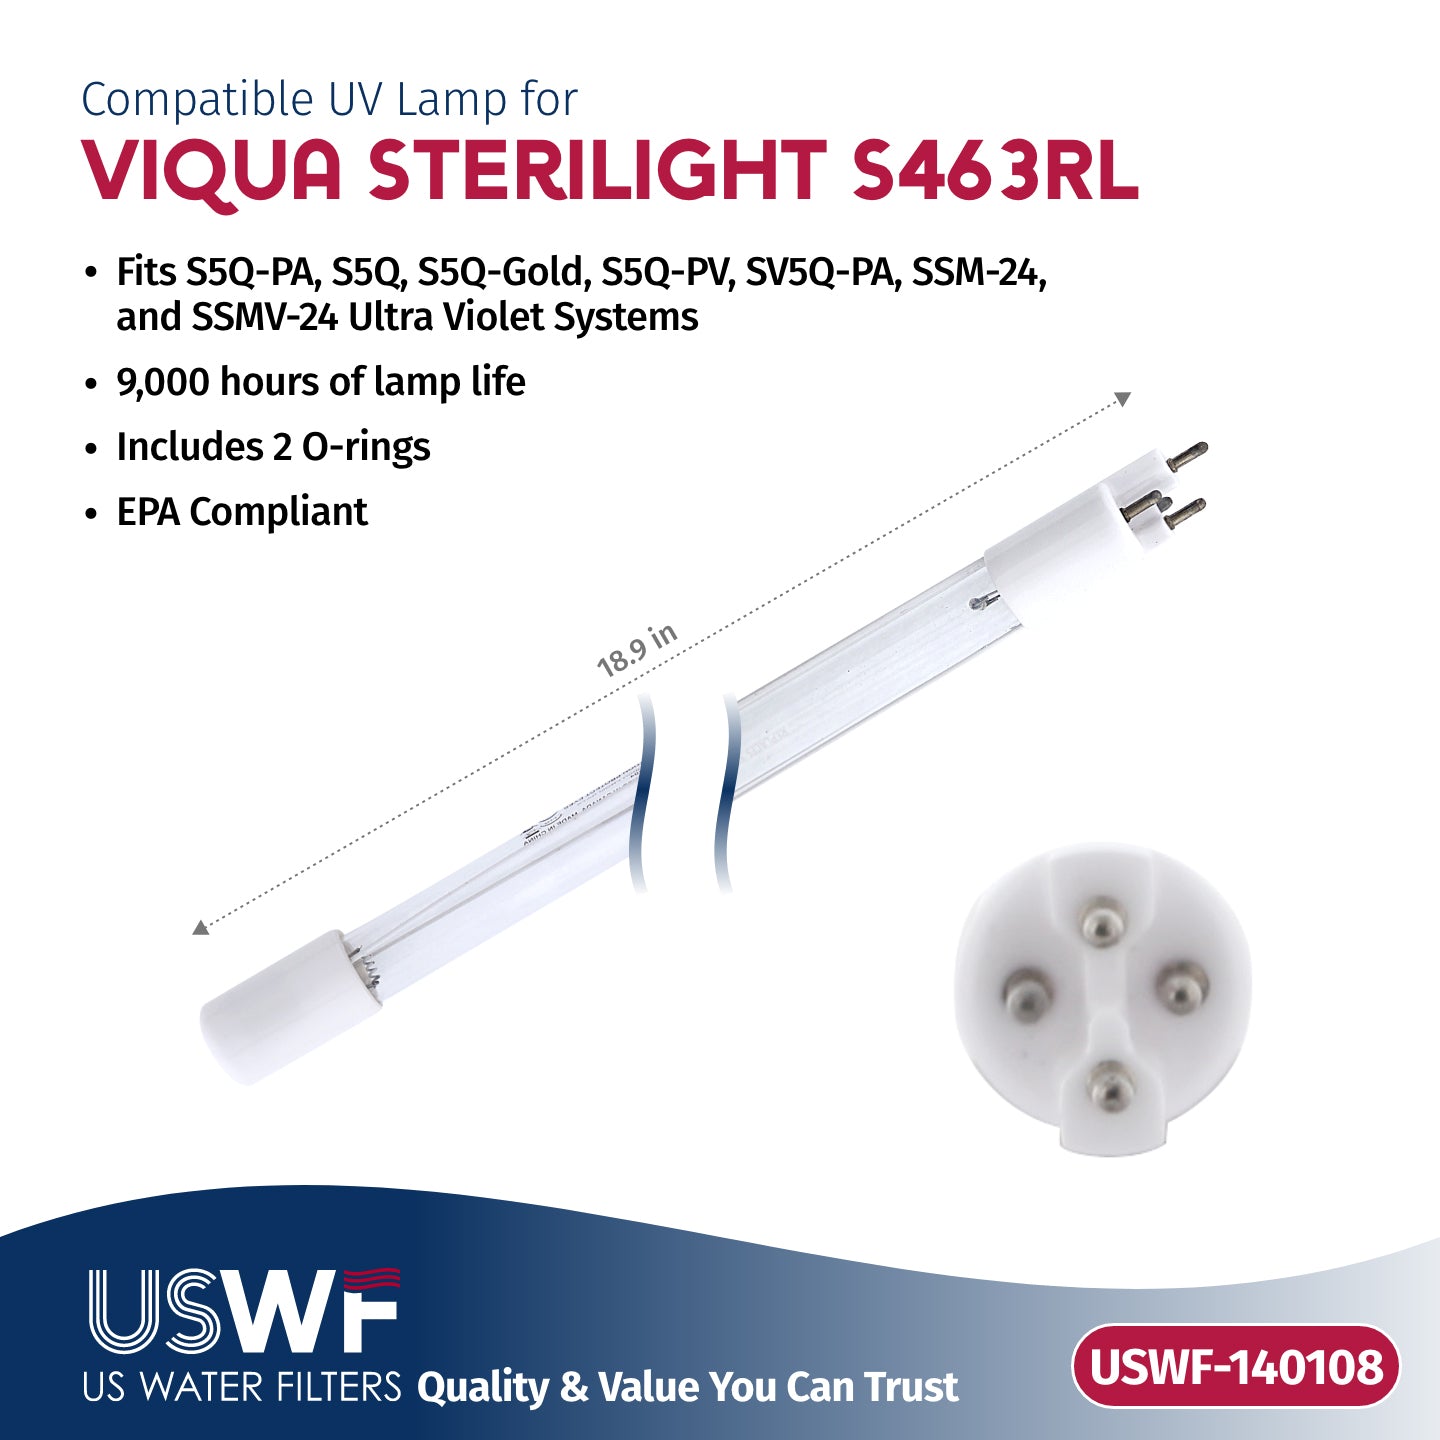 USWF Replacement for S463RL UV Lamp | Fits the VIQUA S5Q, SV5Q-PA, & SSM-24 Series UV Systems